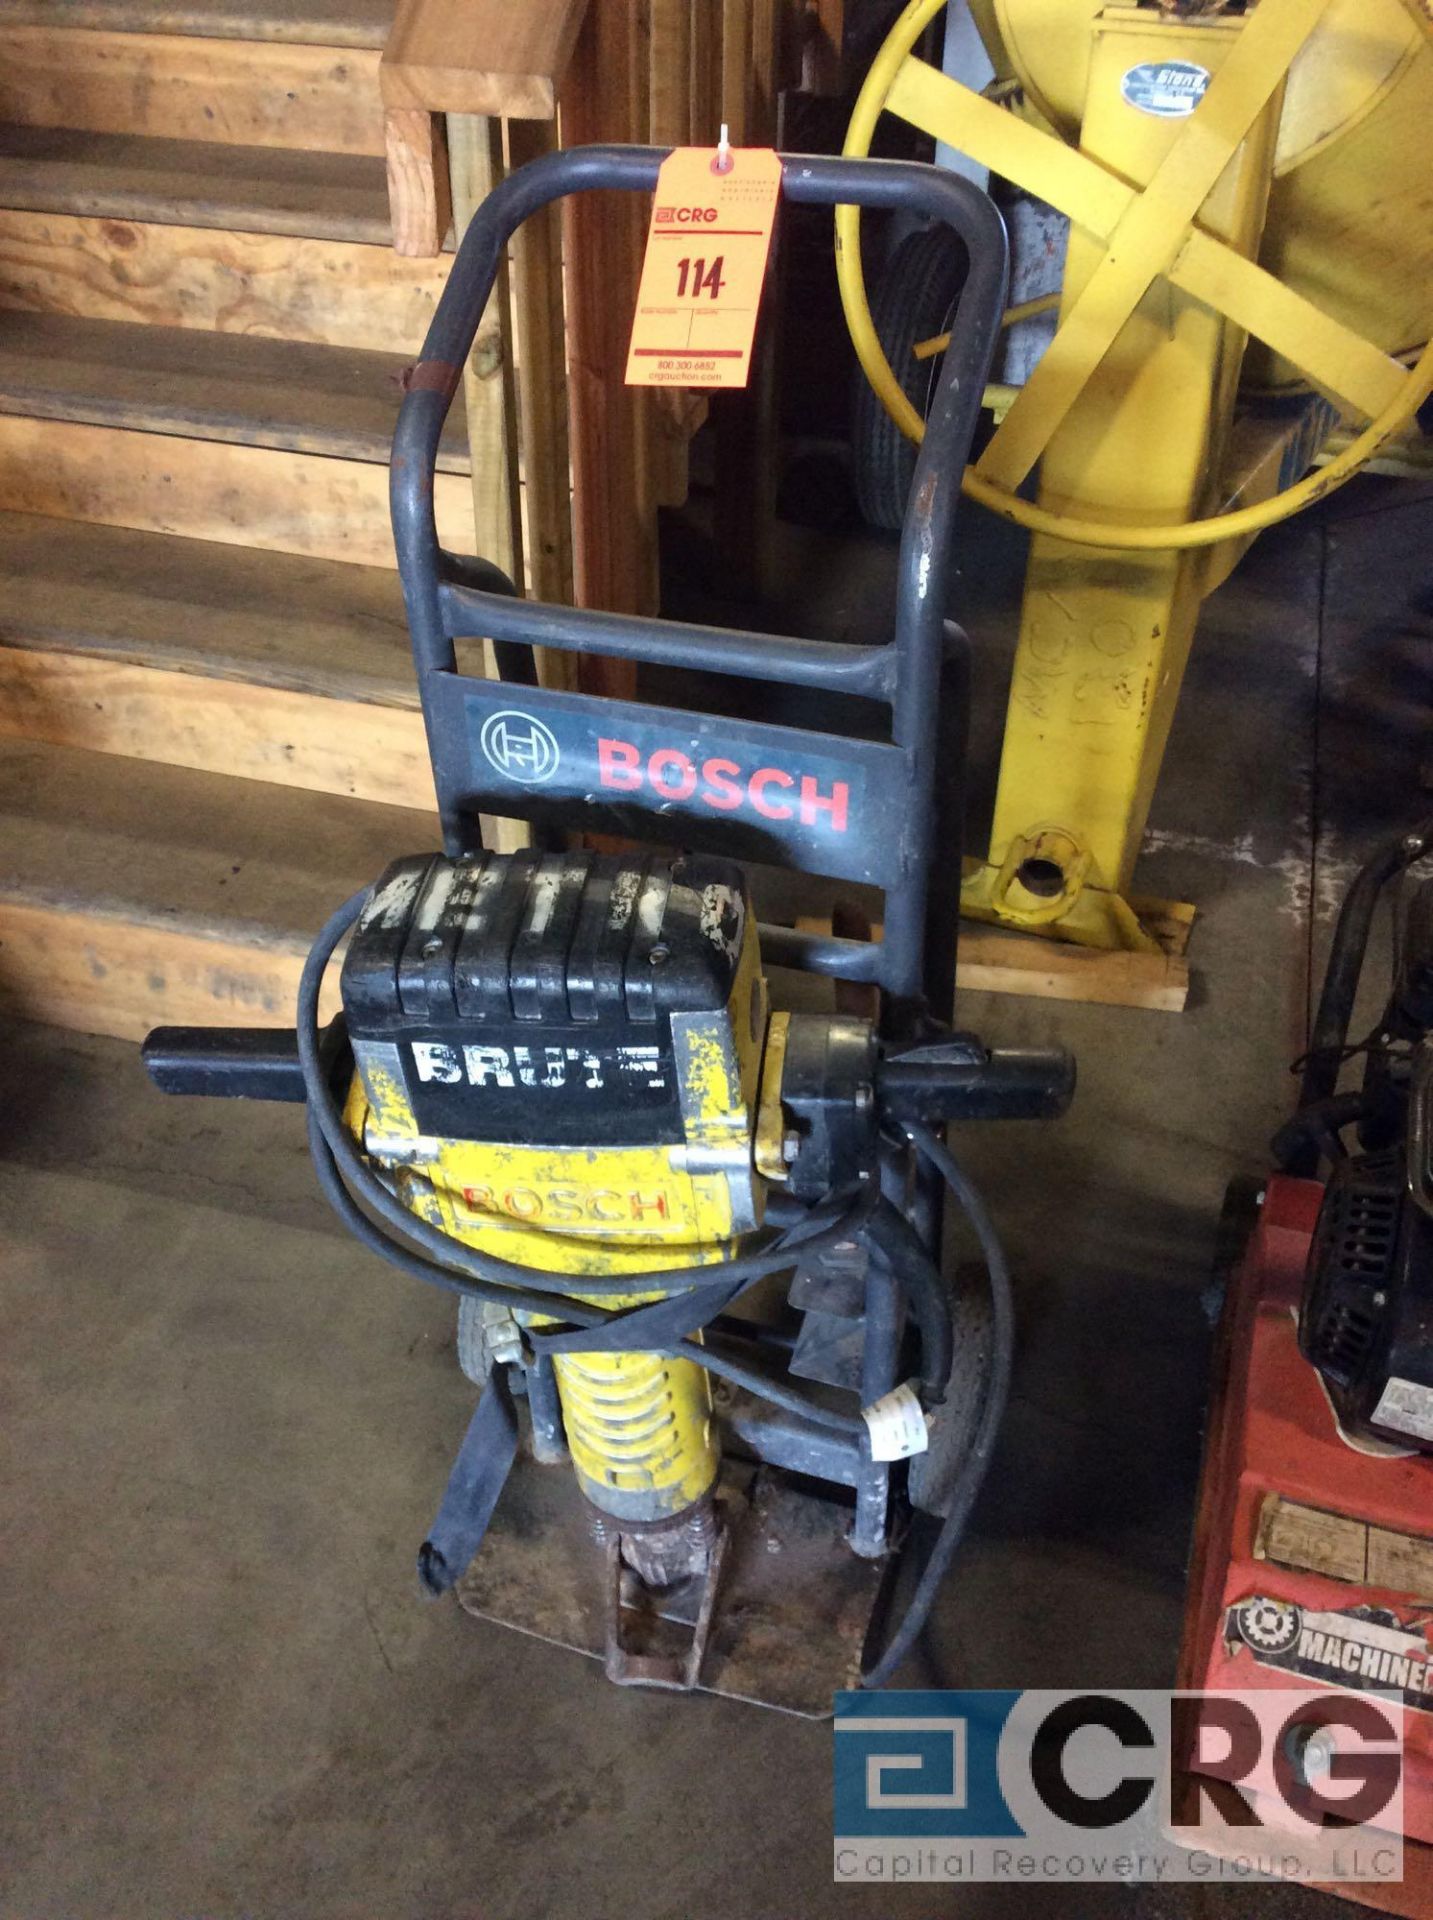 Bosch Brute heavy duty jackhammer with cart (LOCATED INDUSTRIAL COURT INSIDE)